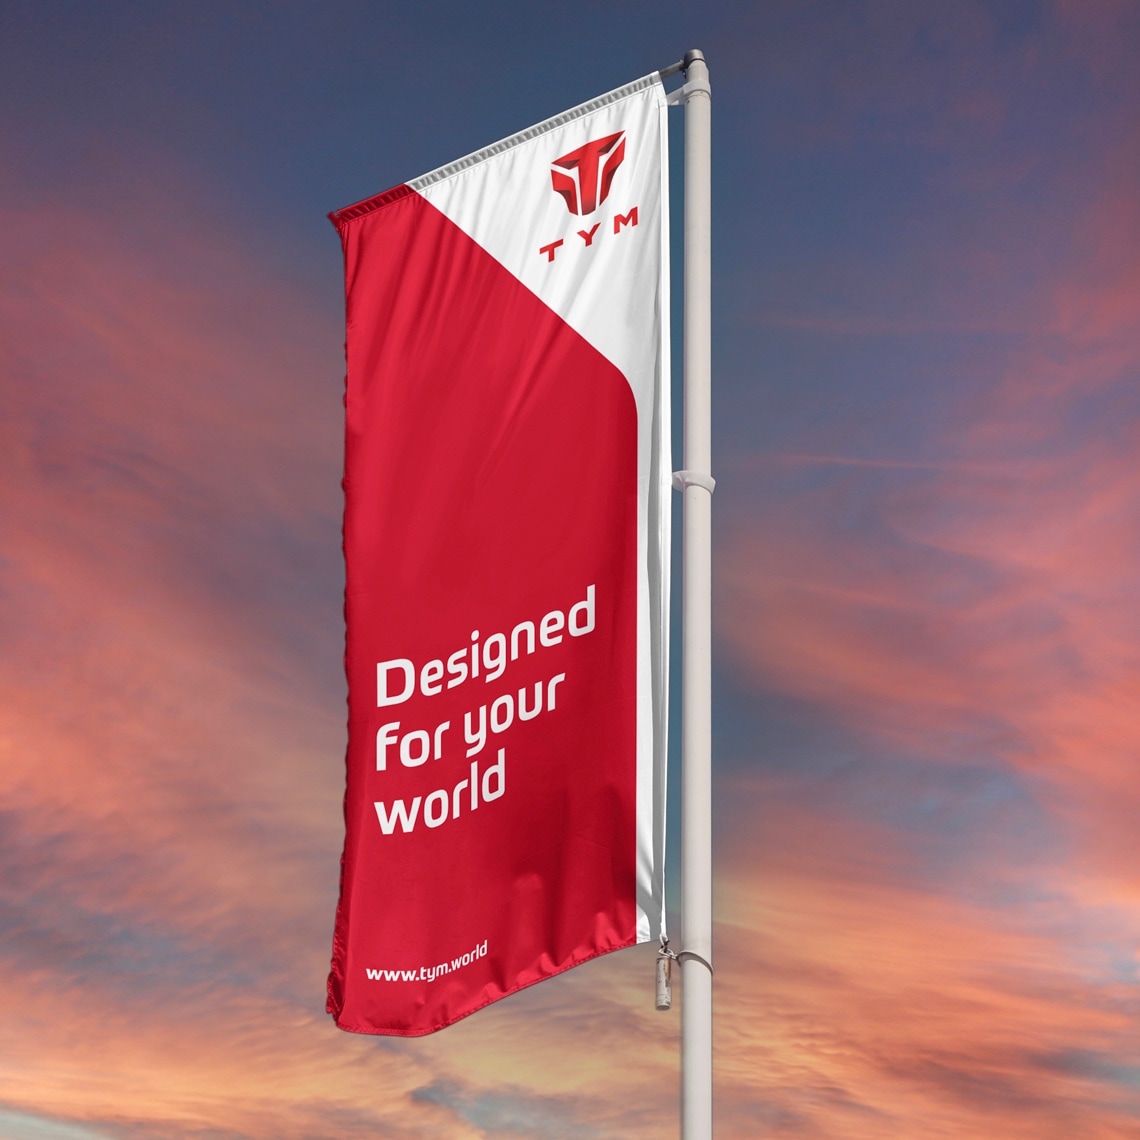 an example of the design system applied to a red and white flag with the words: "designed for your world" on it and theTYM logo at the top.